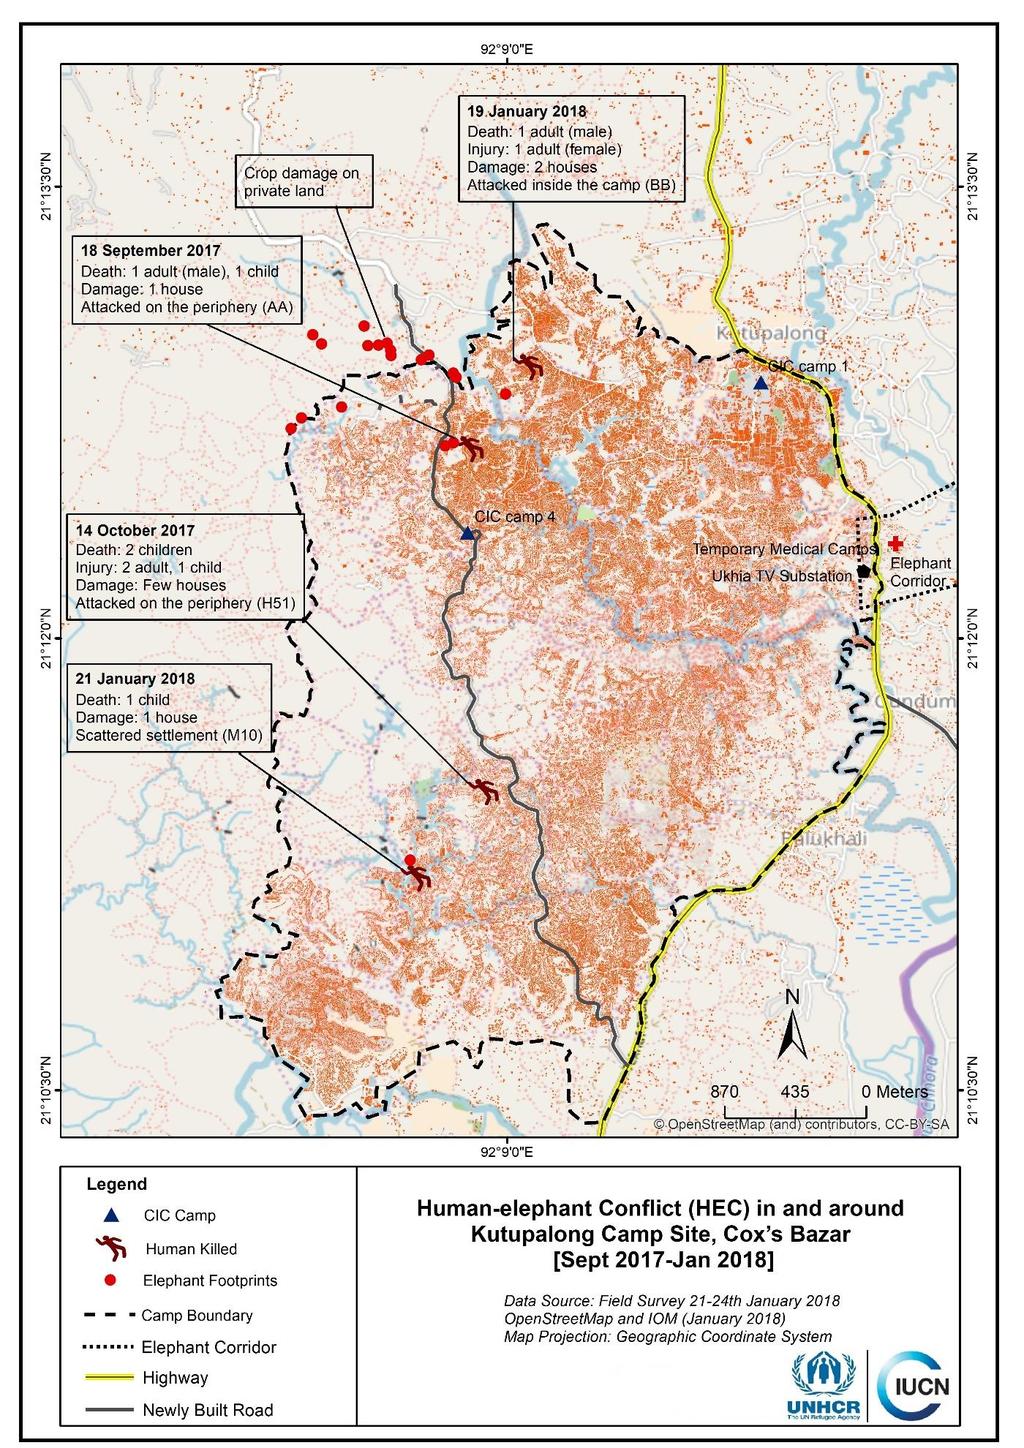 Map 2: Human-elephant conflict incidences around the Kutupalong Camp area since September